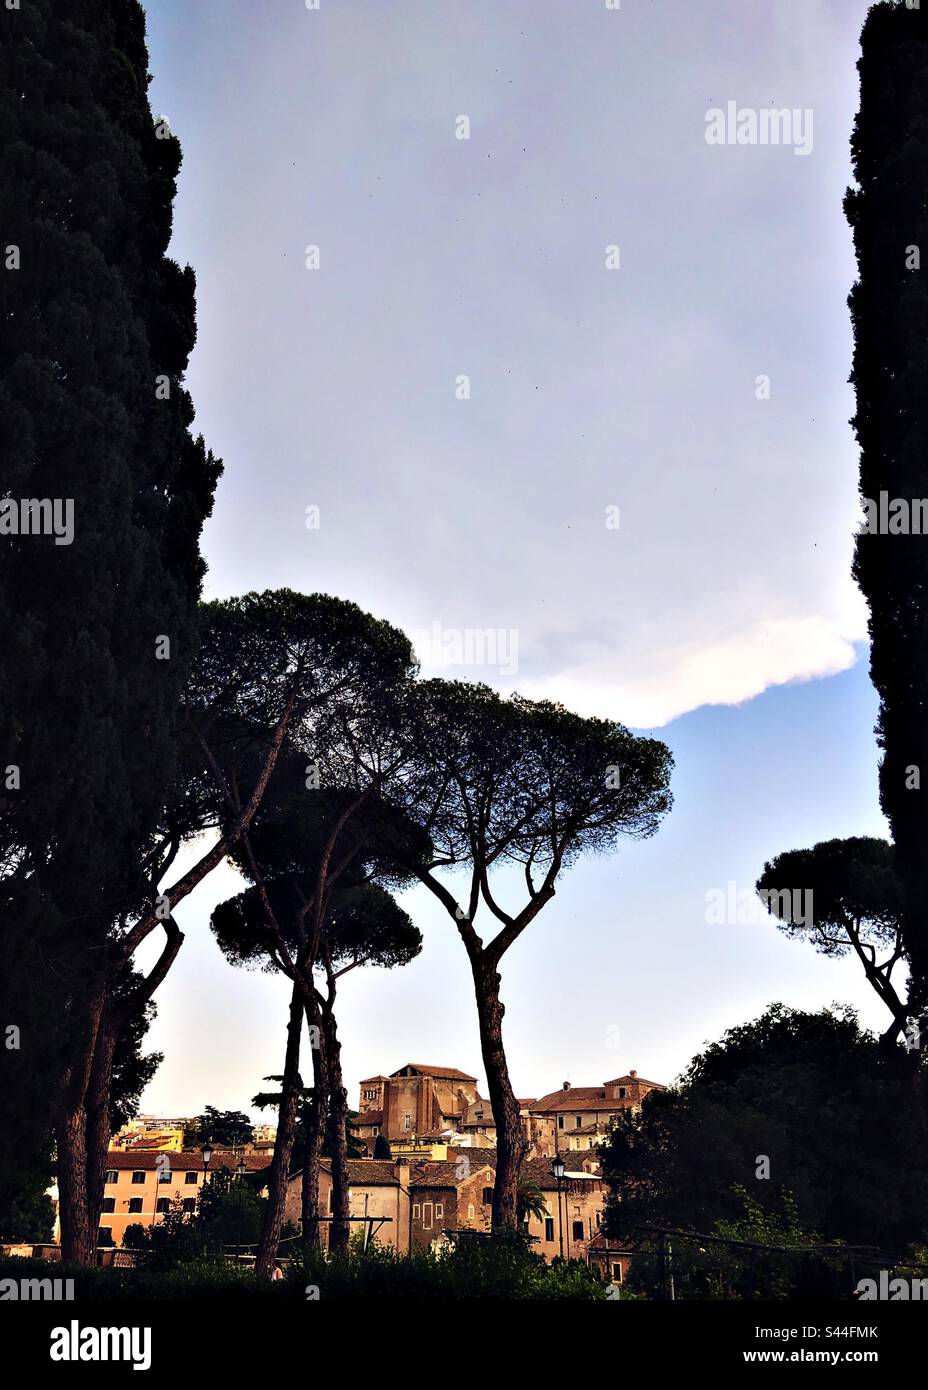 View of rooftops and trees from the Parco del Colle Oppio, Rome, Italy Stock Photo